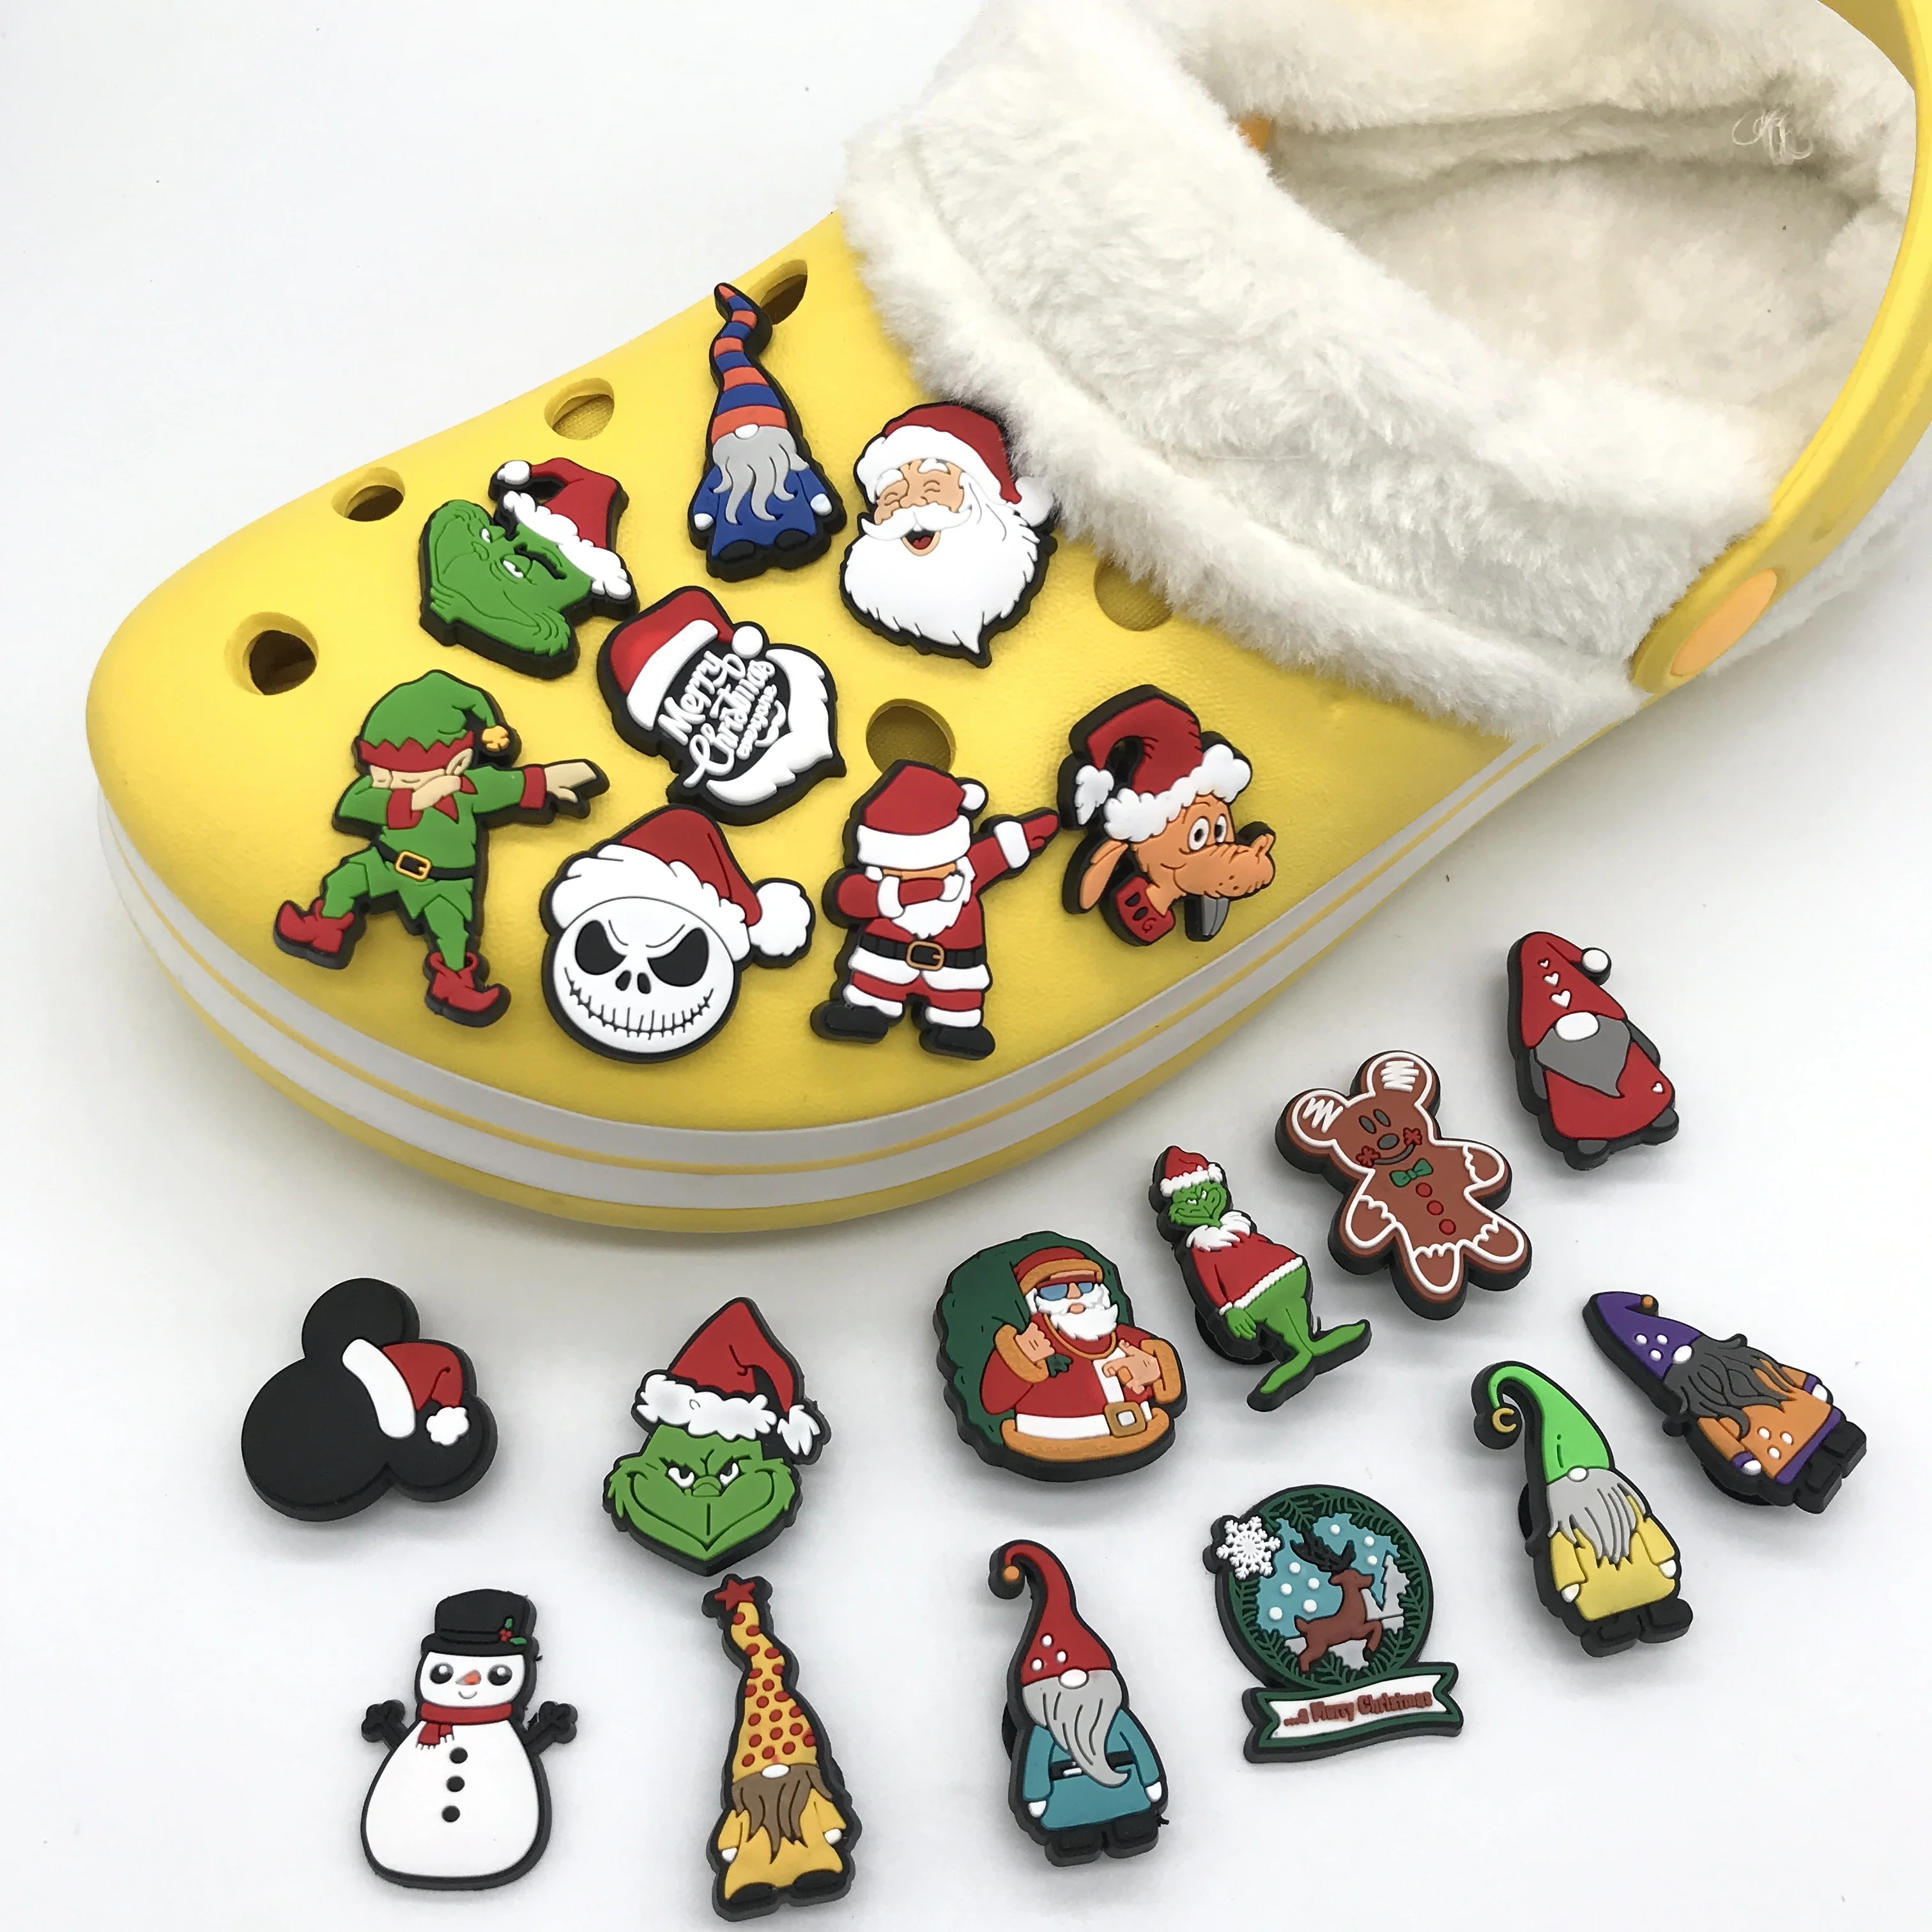 

2021 new design shoe decorations croc charms merry christmas present Santa snowman grinch party gifts shoes charms, Picture